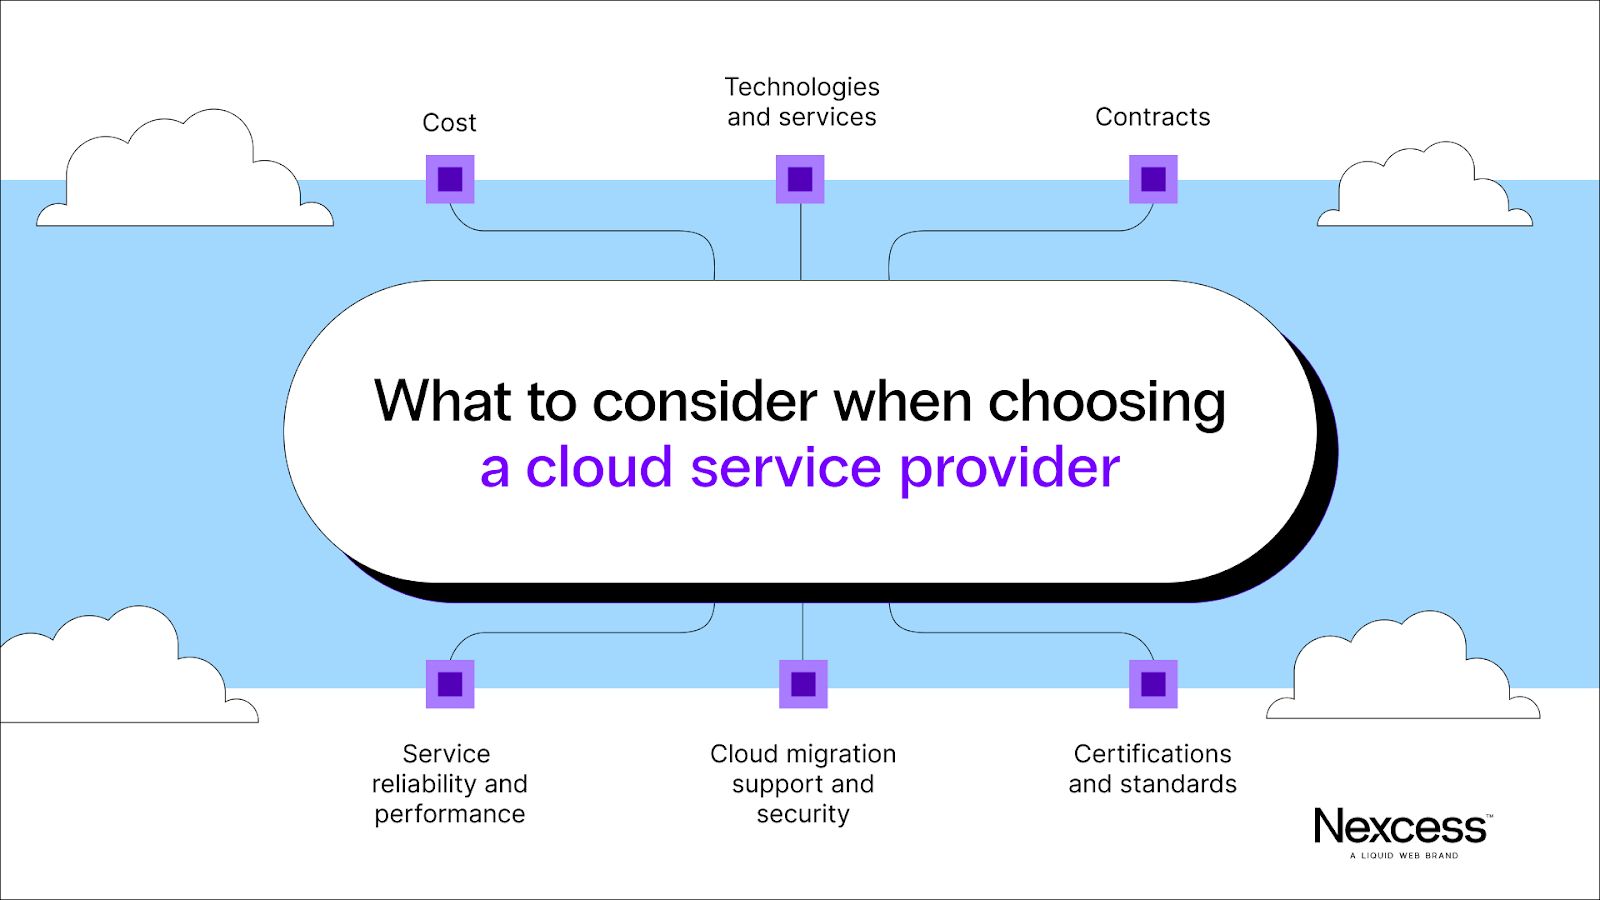 You should consider several things before choosing a cloud service provider.